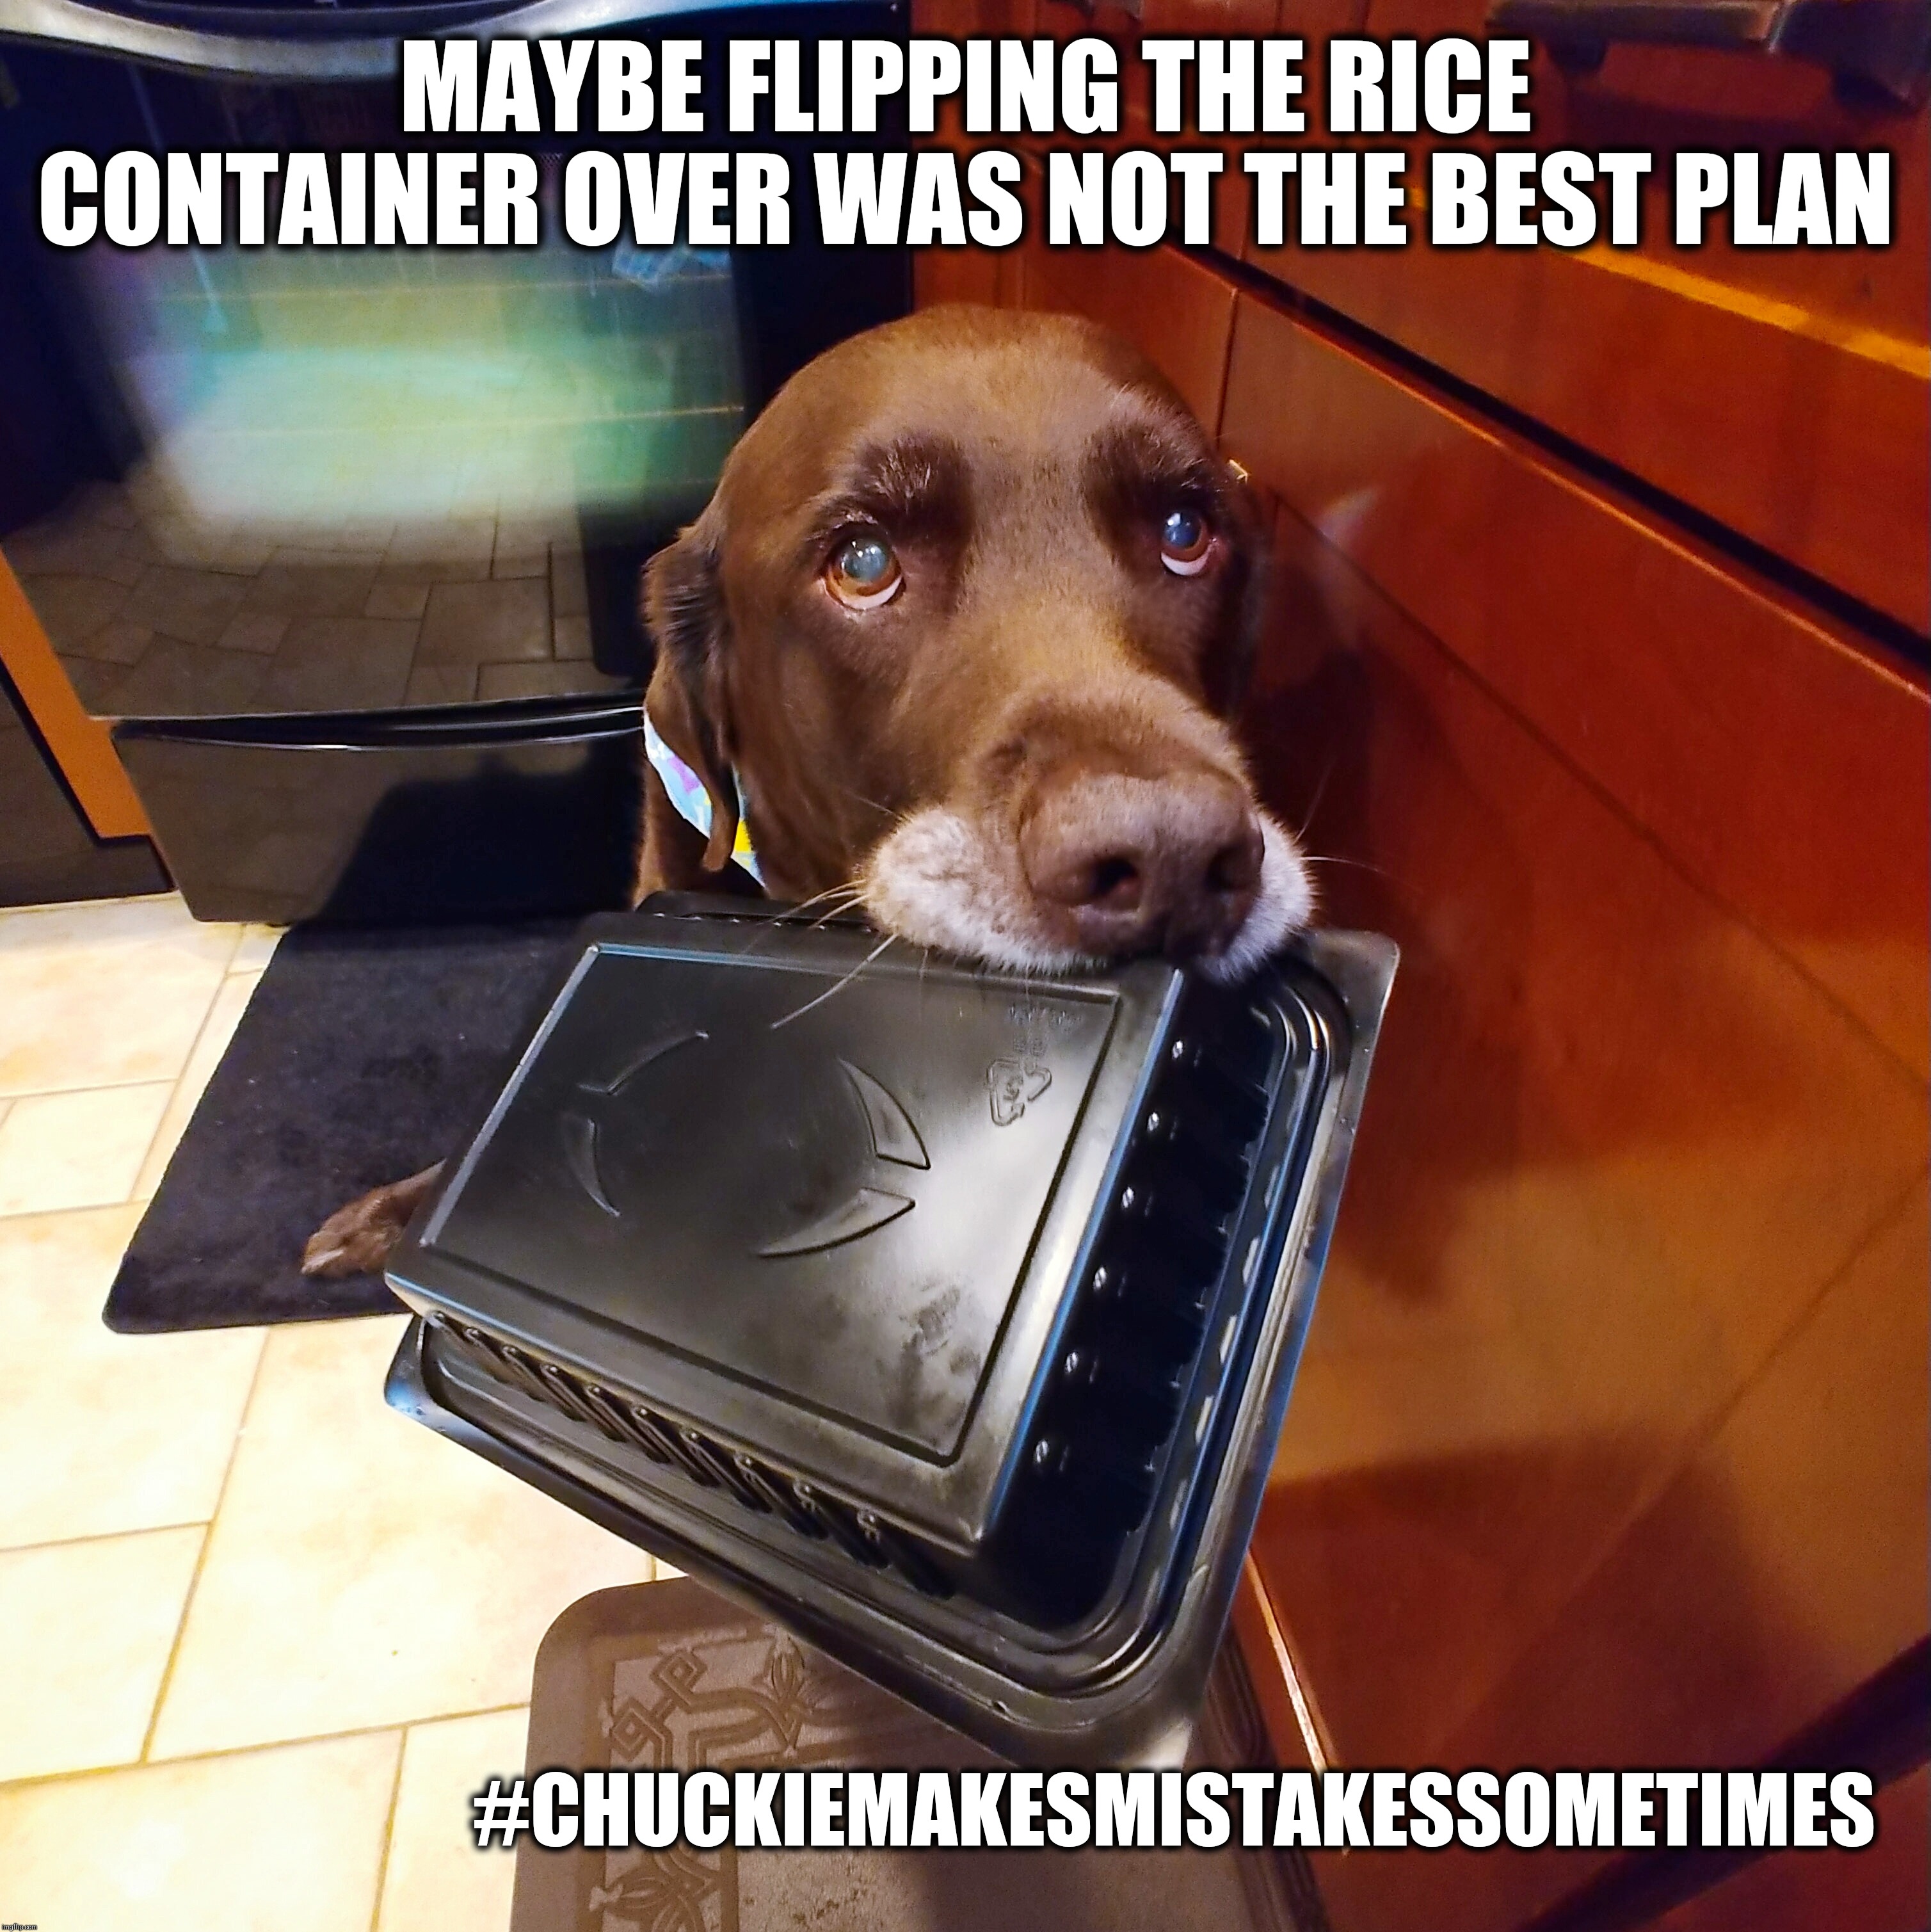 I made a mistake | MAYBE FLIPPING THE RICE CONTAINER OVER WAS NOT THE BEST PLAN; #CHUCKIEMAKESMISTAKESSOMETIMES | image tagged in mistake,dogs,memes,funny,chuckie makes mistakes sometimes,chuckie the chocolate lab | made w/ Imgflip meme maker